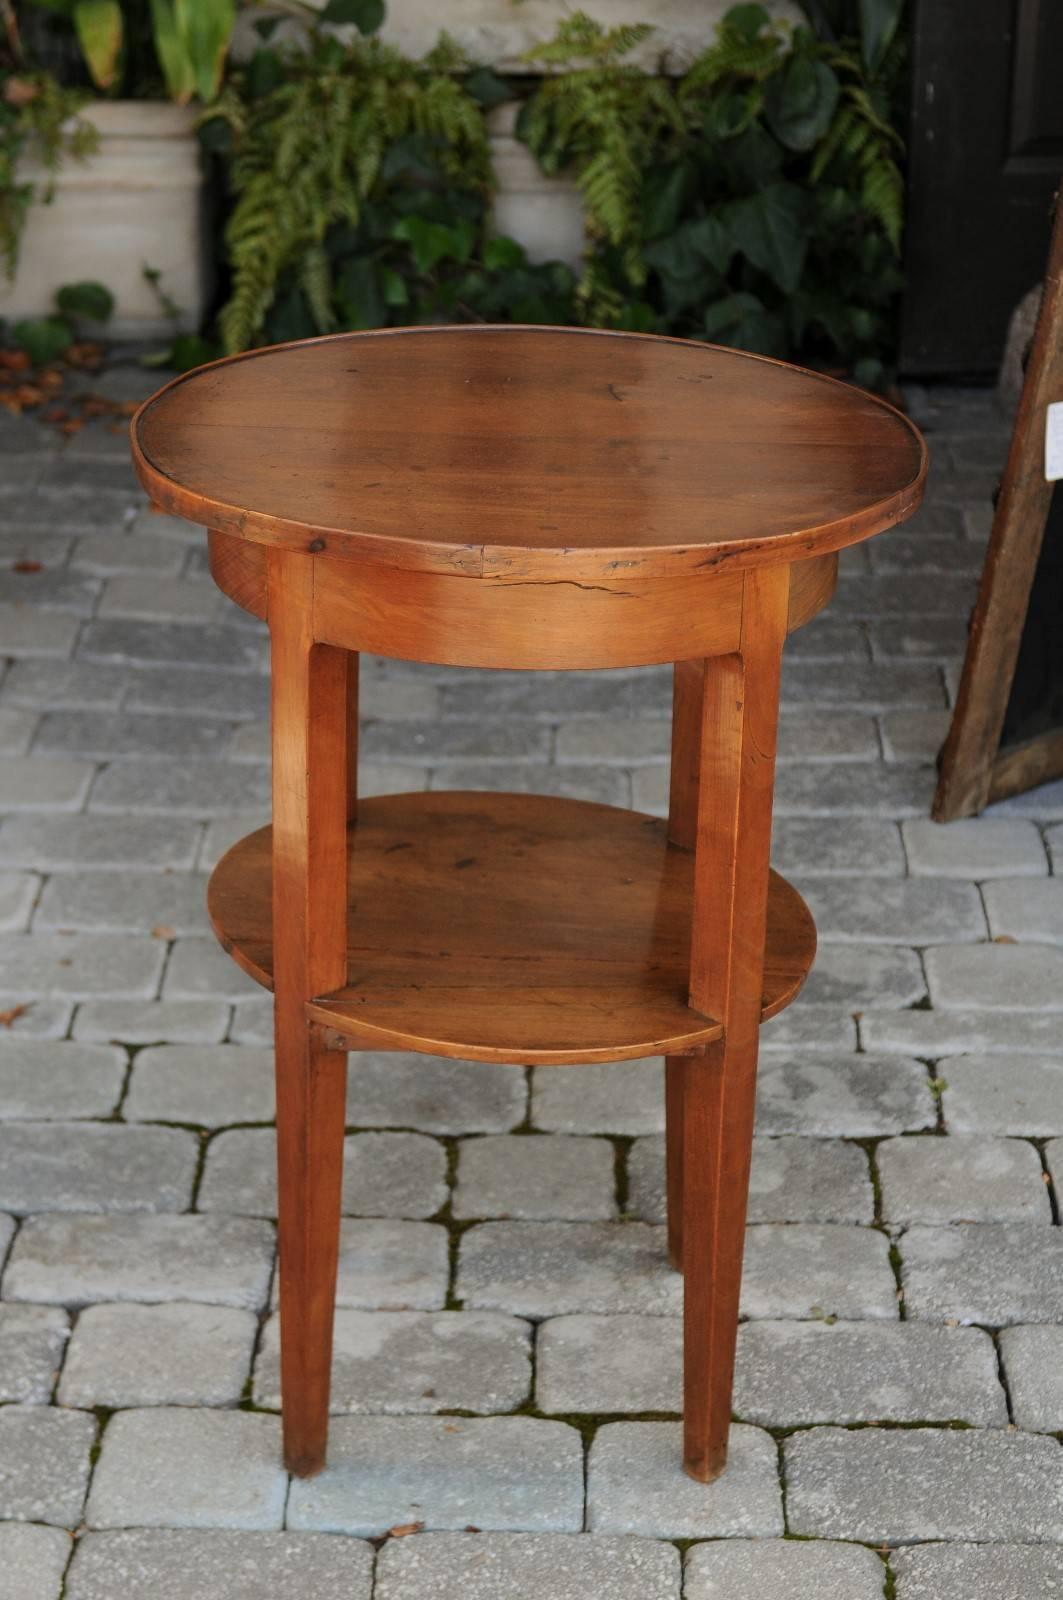 French Circular Side Table with Single Drawer and Lower Shelf from the 1840s 4